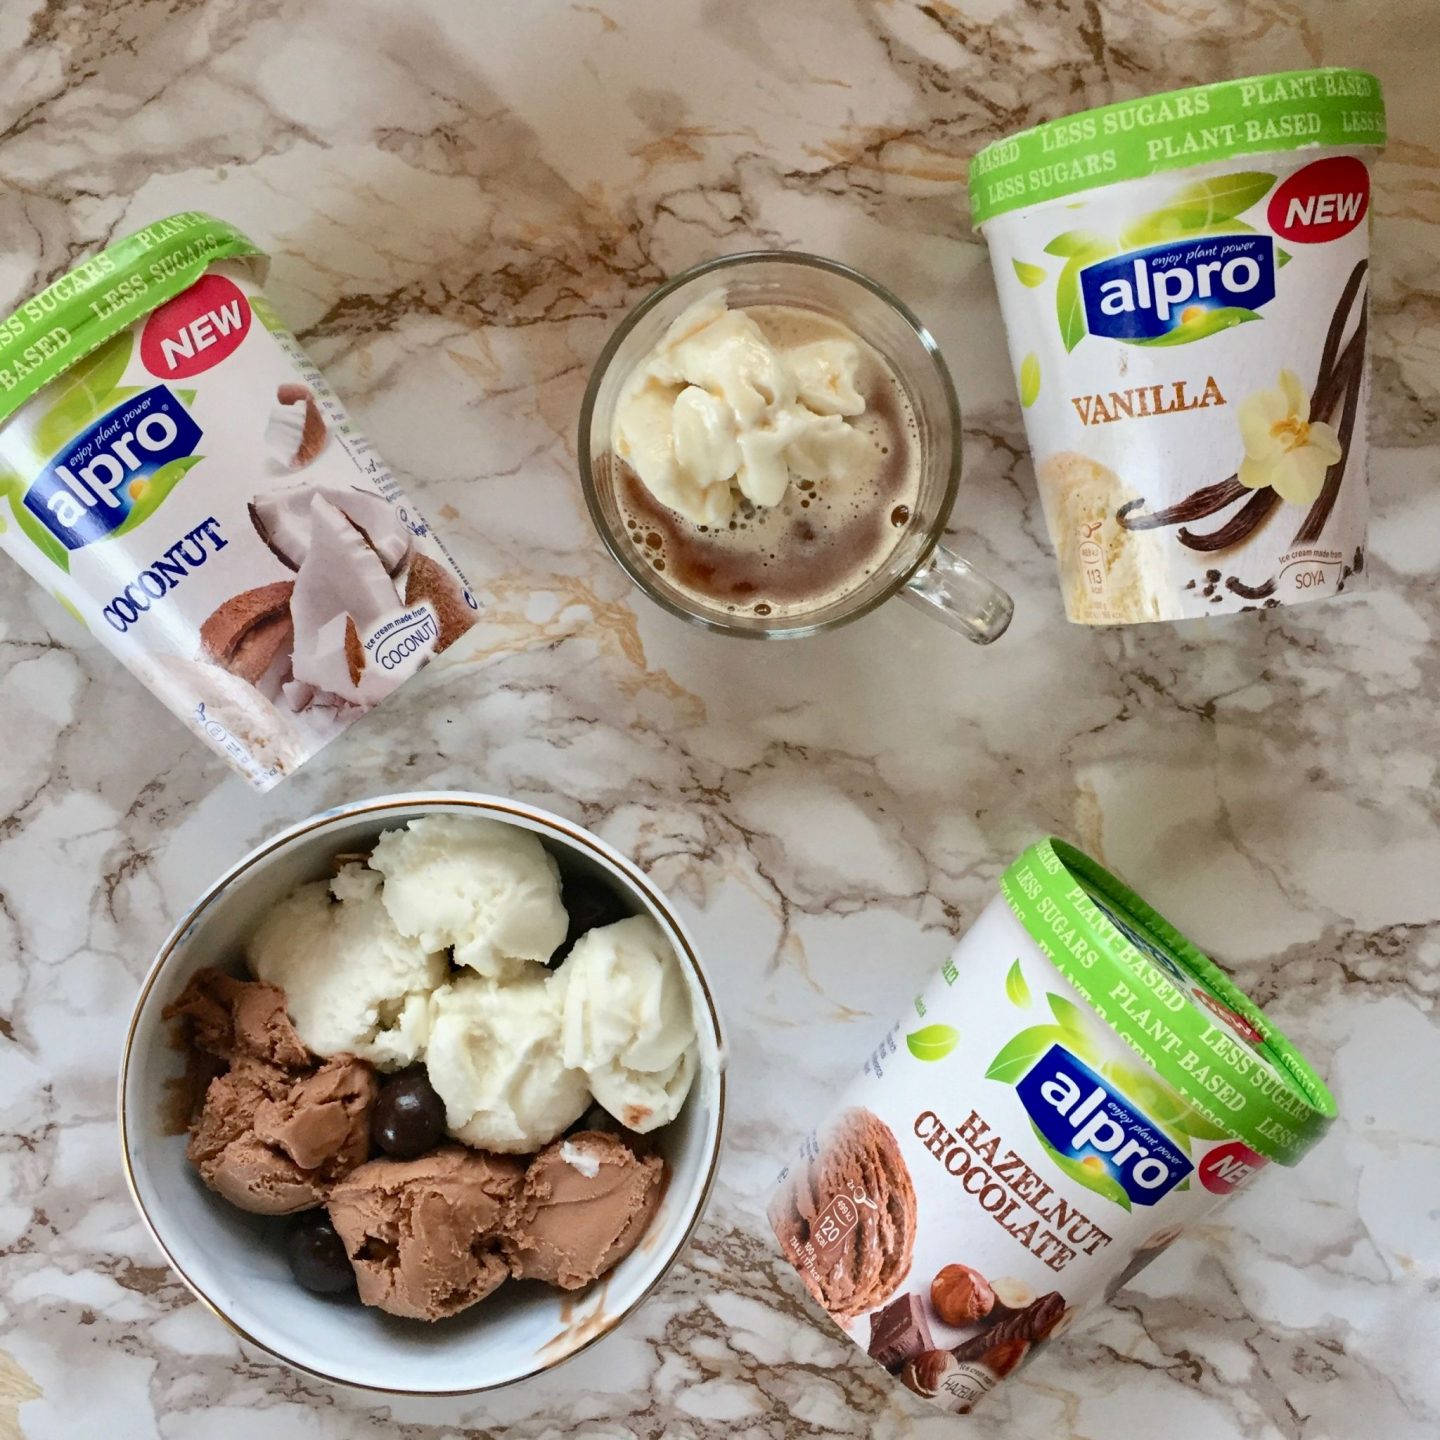 Your Summer Cravings Are Now Satisfied Thanks To Alpro’s New Ice-Cream Offerings